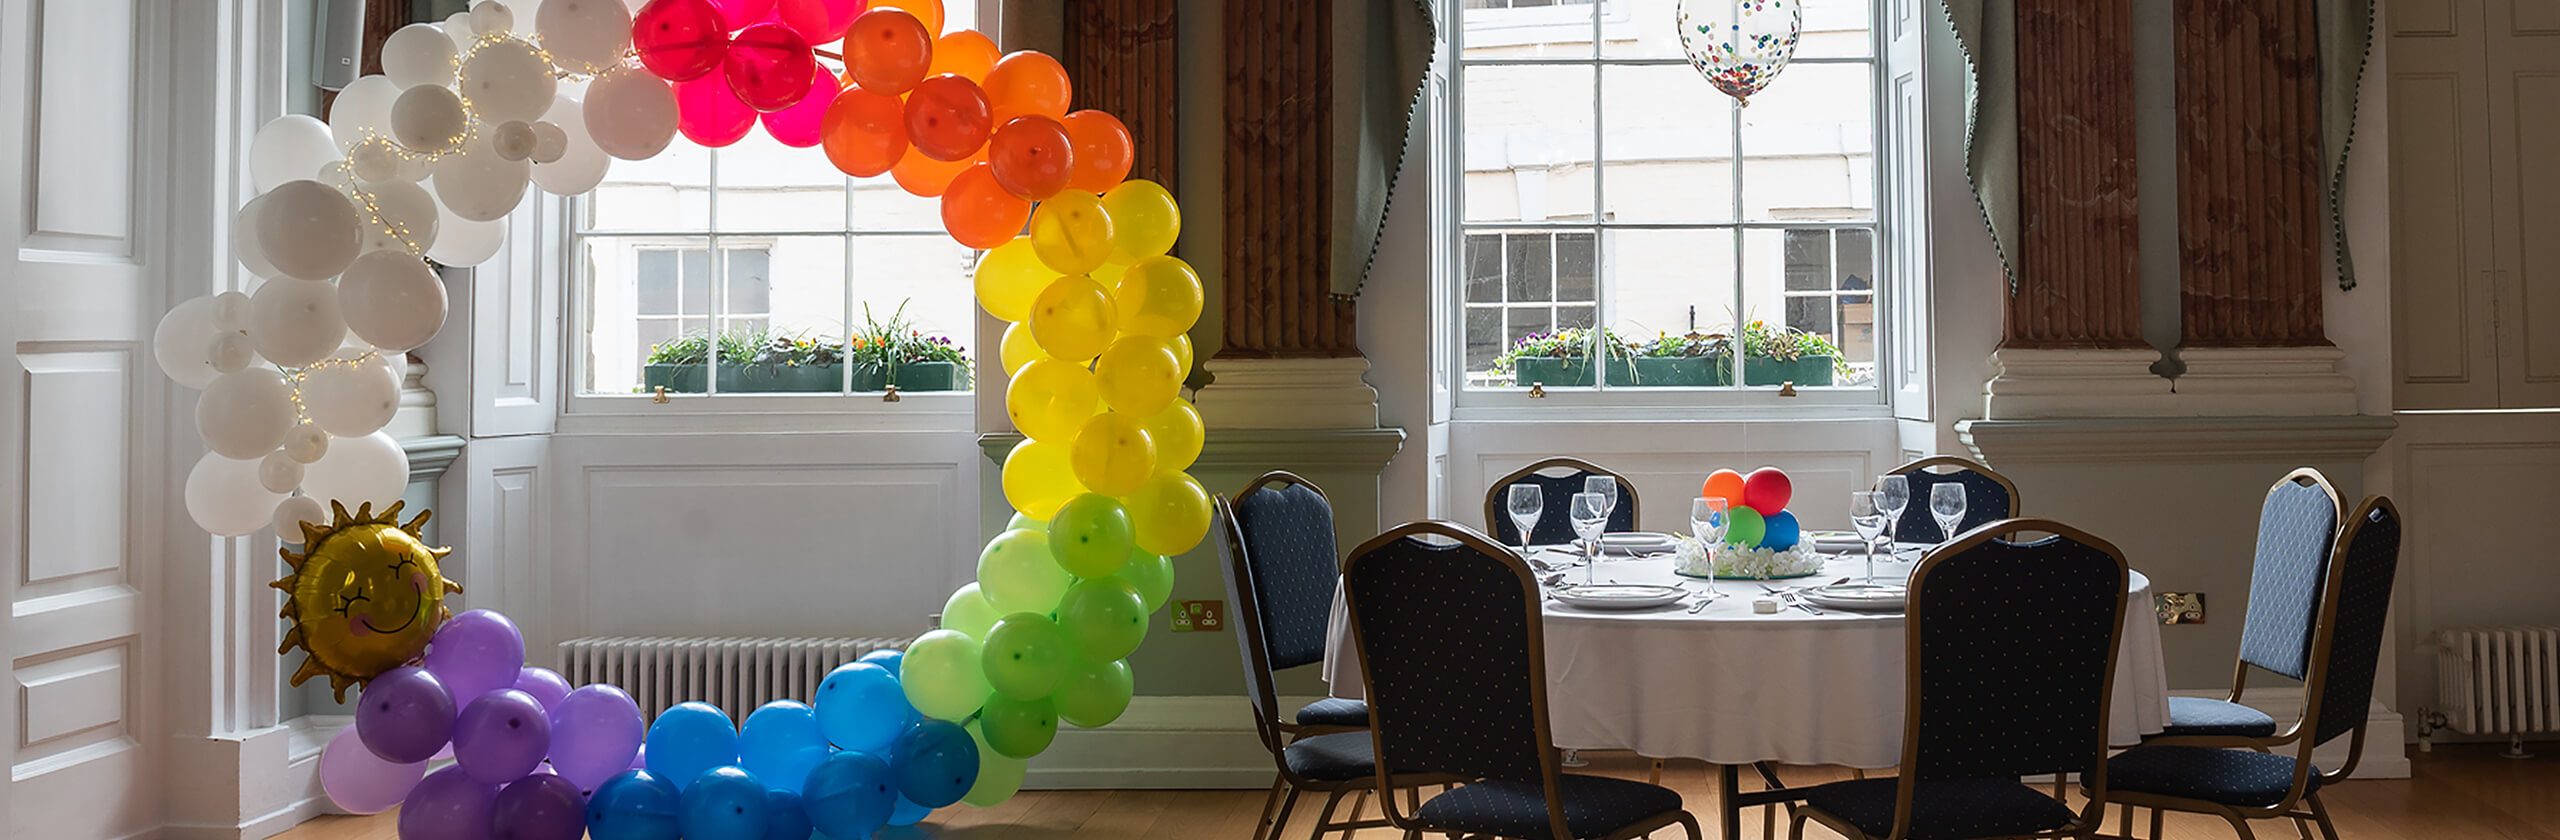 A rainbow balloon circle next to a decorated table